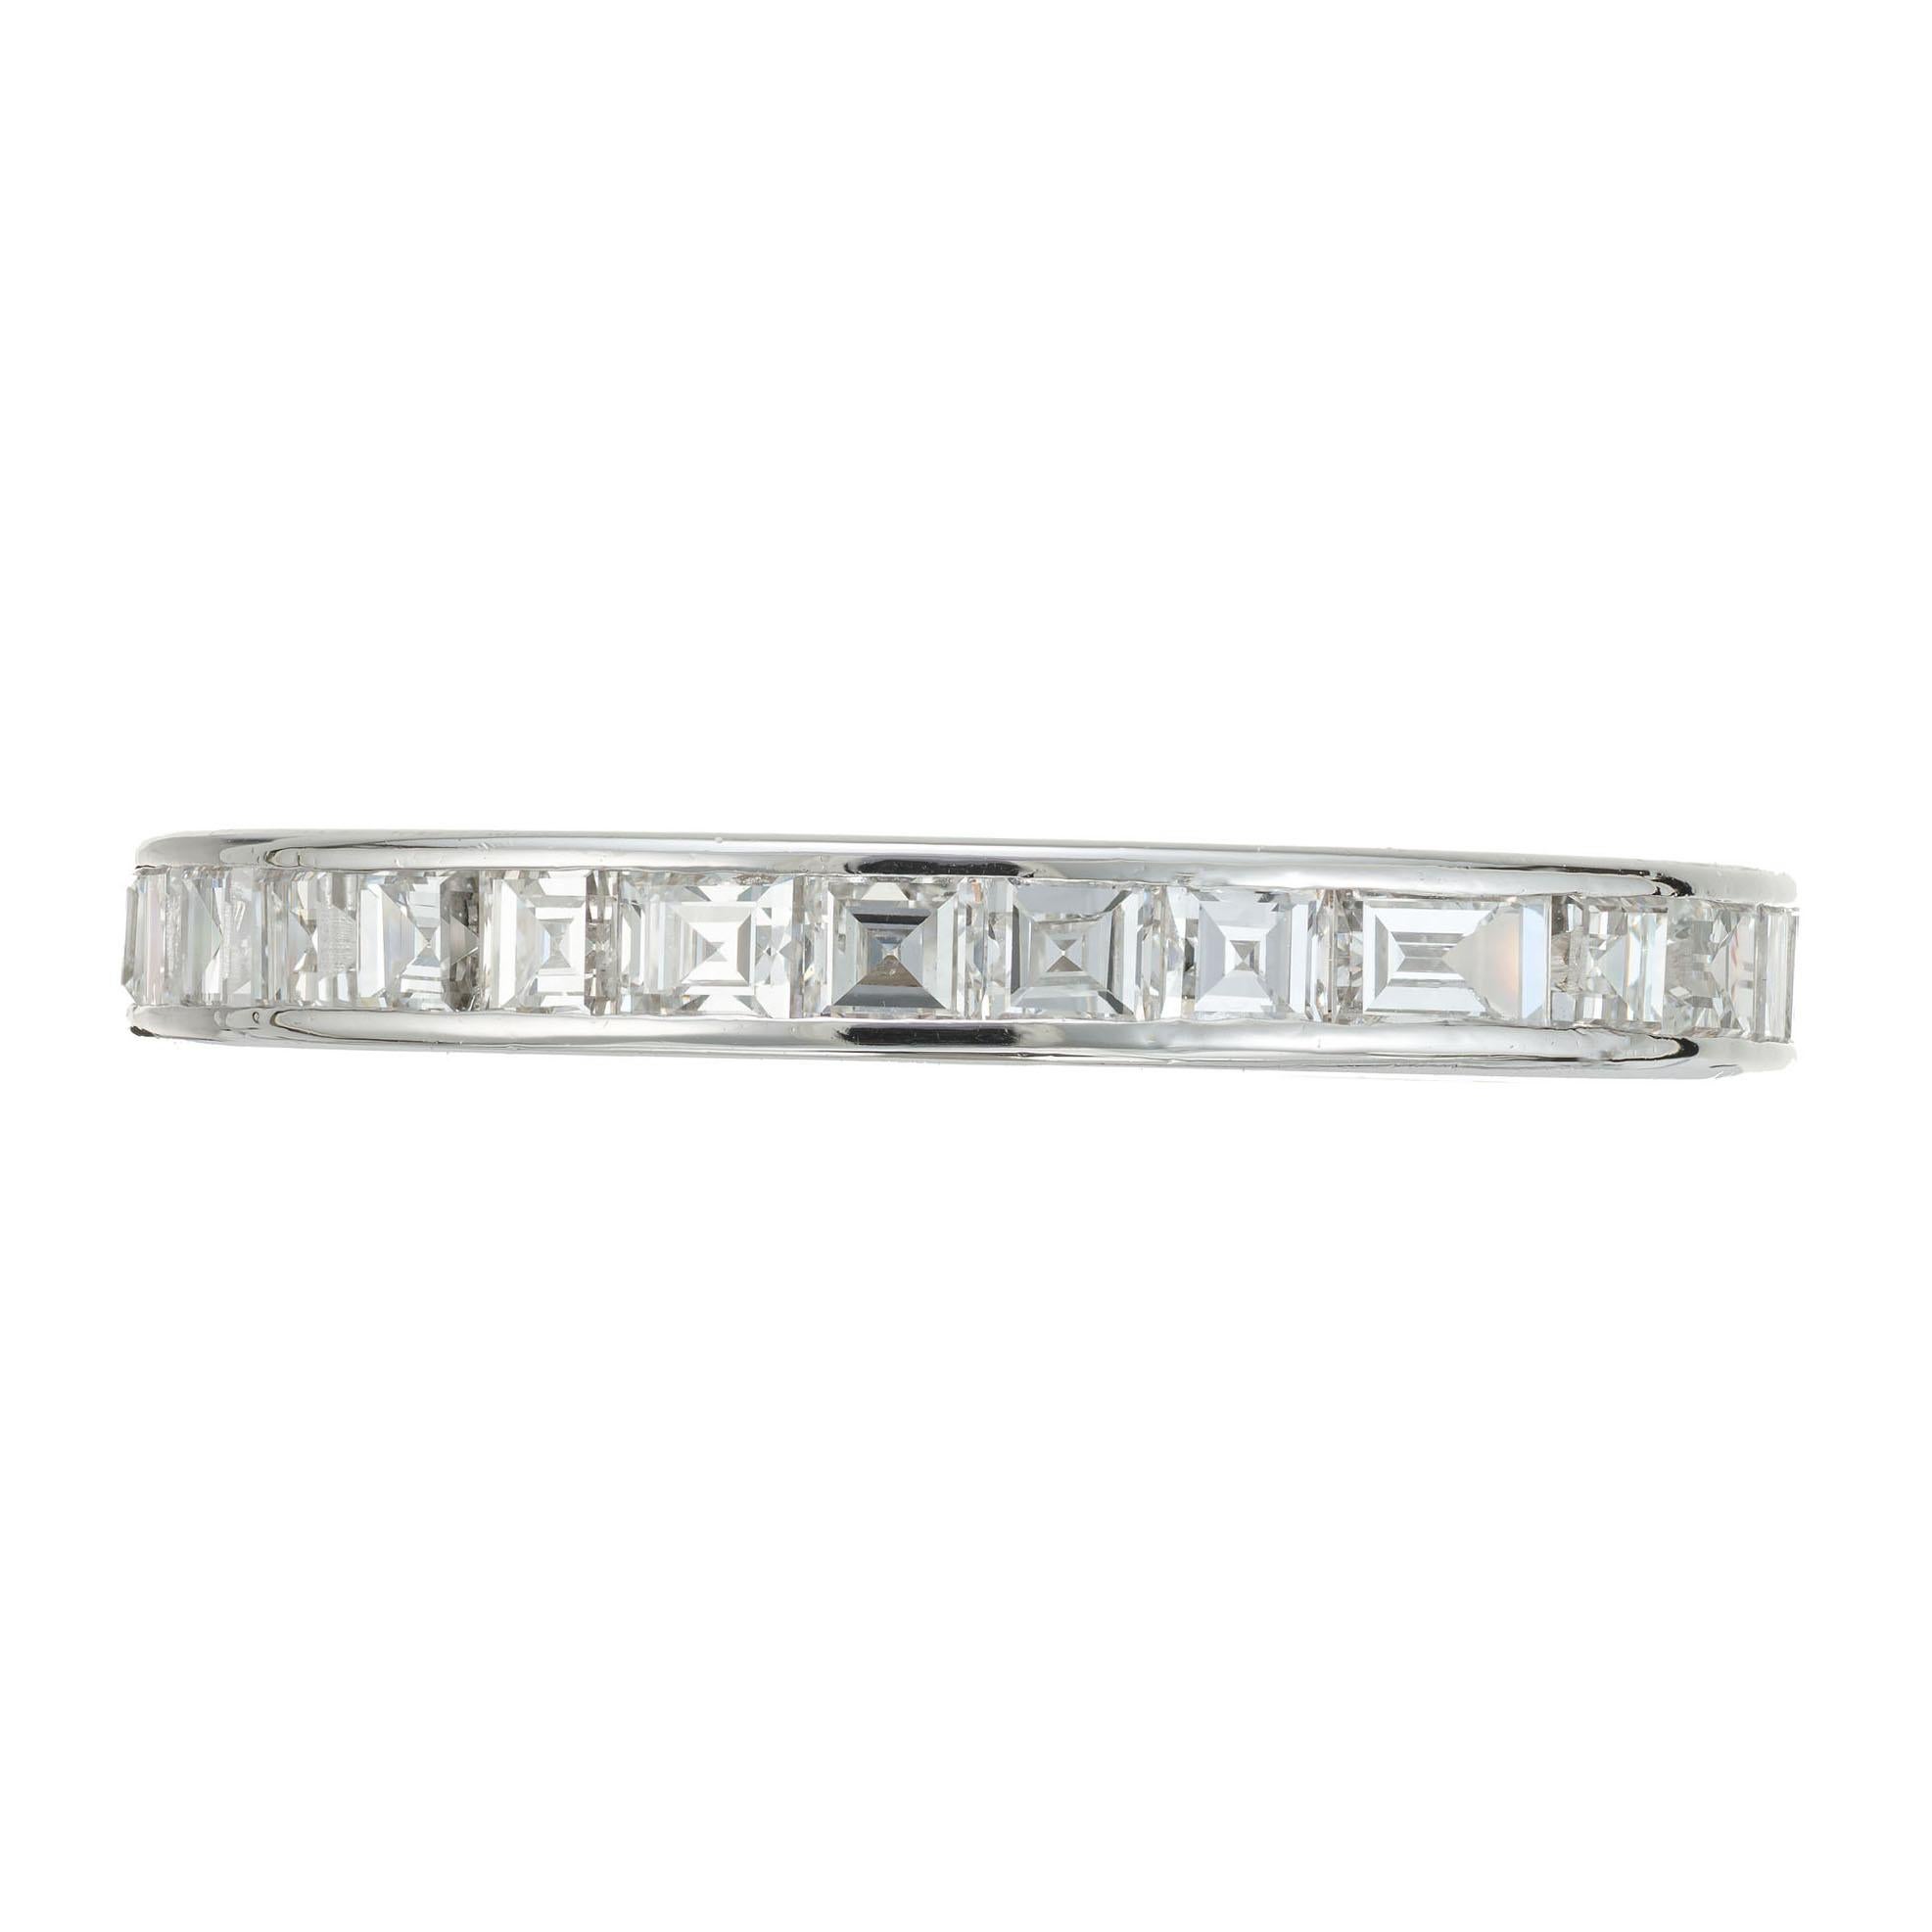 Handmade vintage eternity wedding band ring. 30 square step cut diamonds in a platinum setting.  

30 step cut diamonds, G VS approx. 1.50cts
8.25 and sizable
Platinum 
3.9 grams
Width at top: 3.0mm
Height at top: 2.0mm
Width at bottom: 3.0mm


